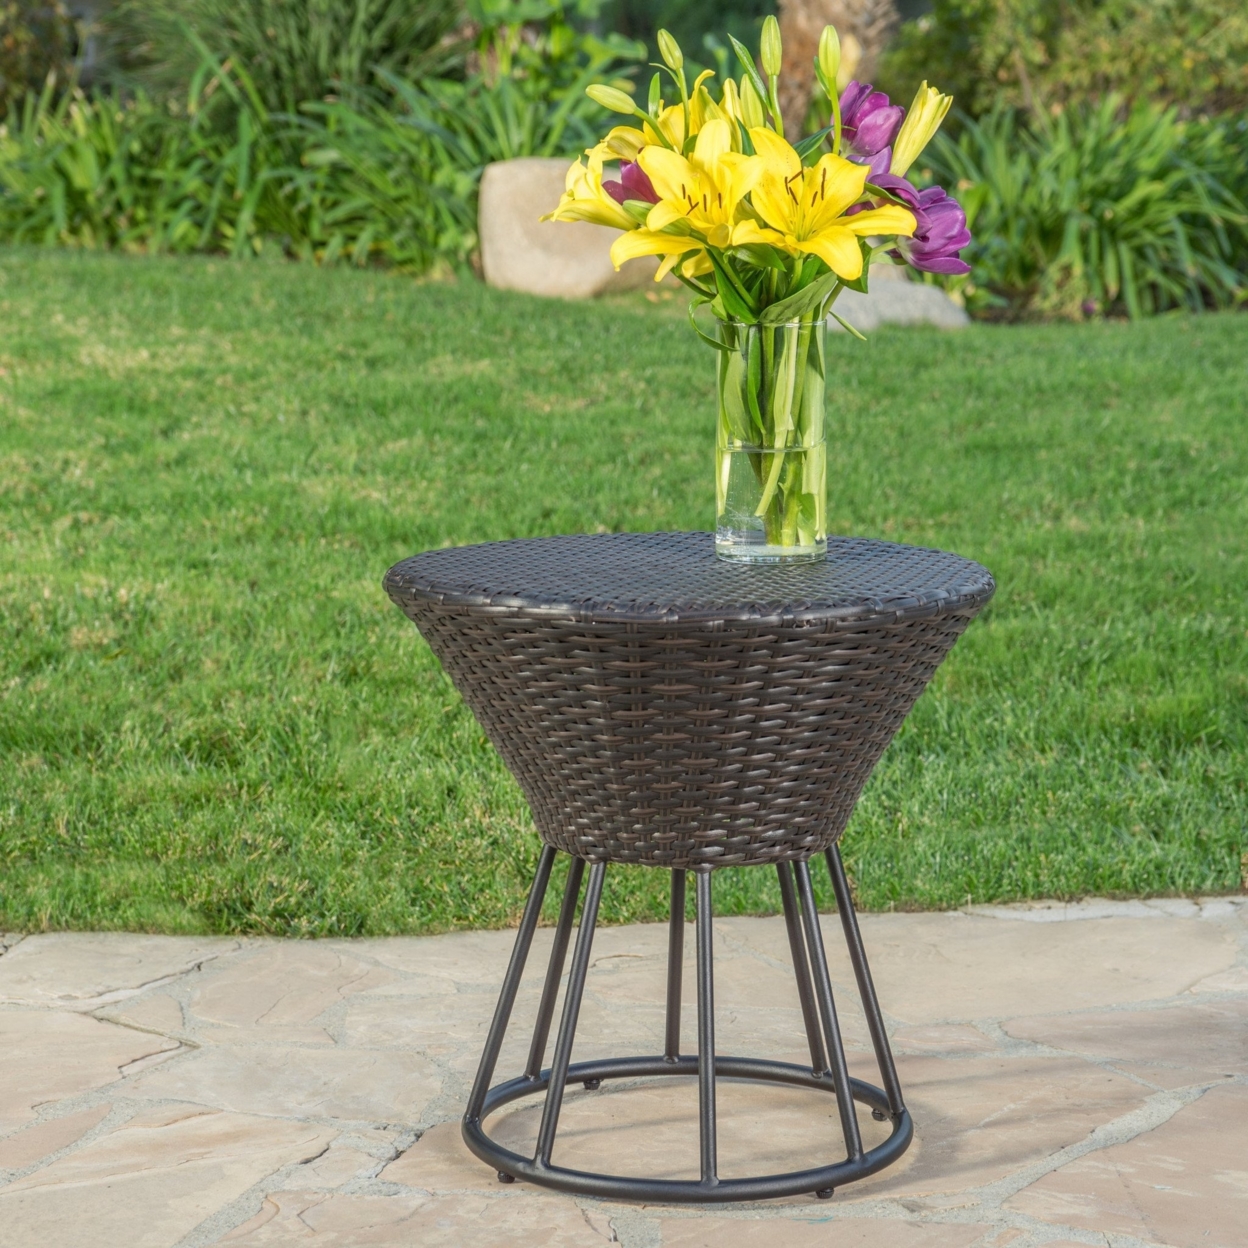 Kavala Wicker Outdoor Accent Table - Gray